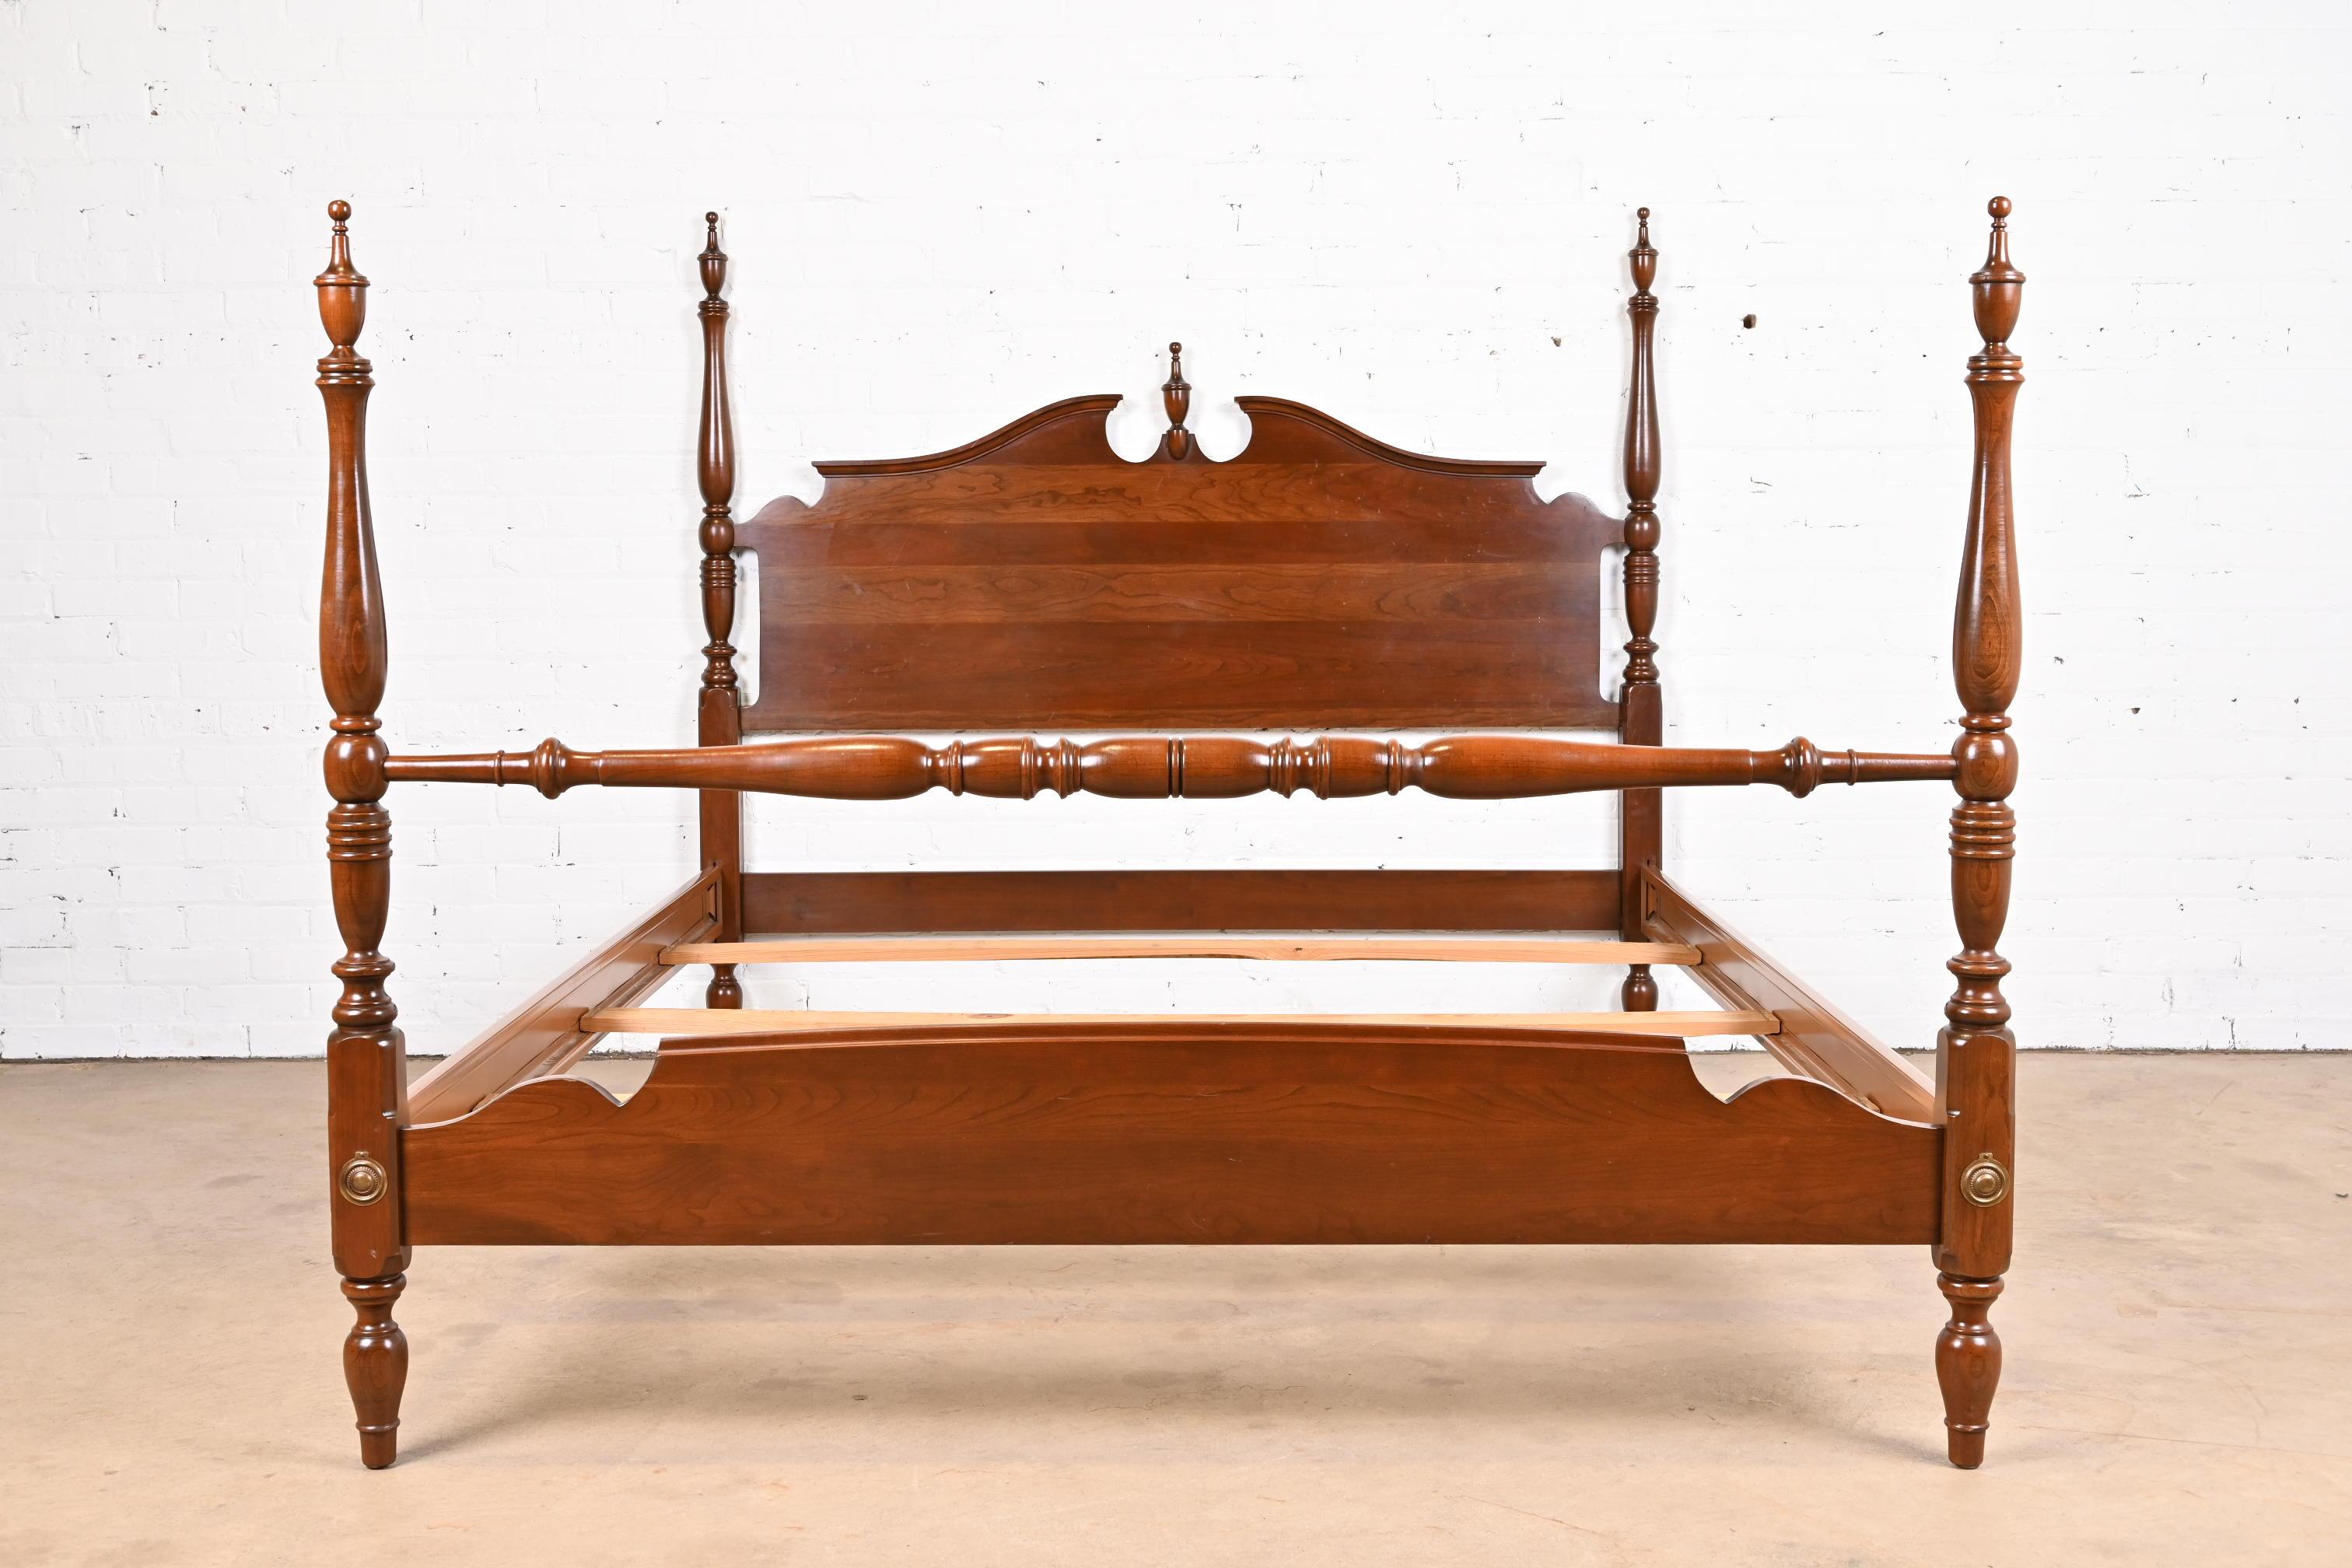 A gorgeous Federal or Georgian style four poster queen size bed

USA, Circa 1980s

Carved solid cherry wood, with brass accents.

Measures: 63.75